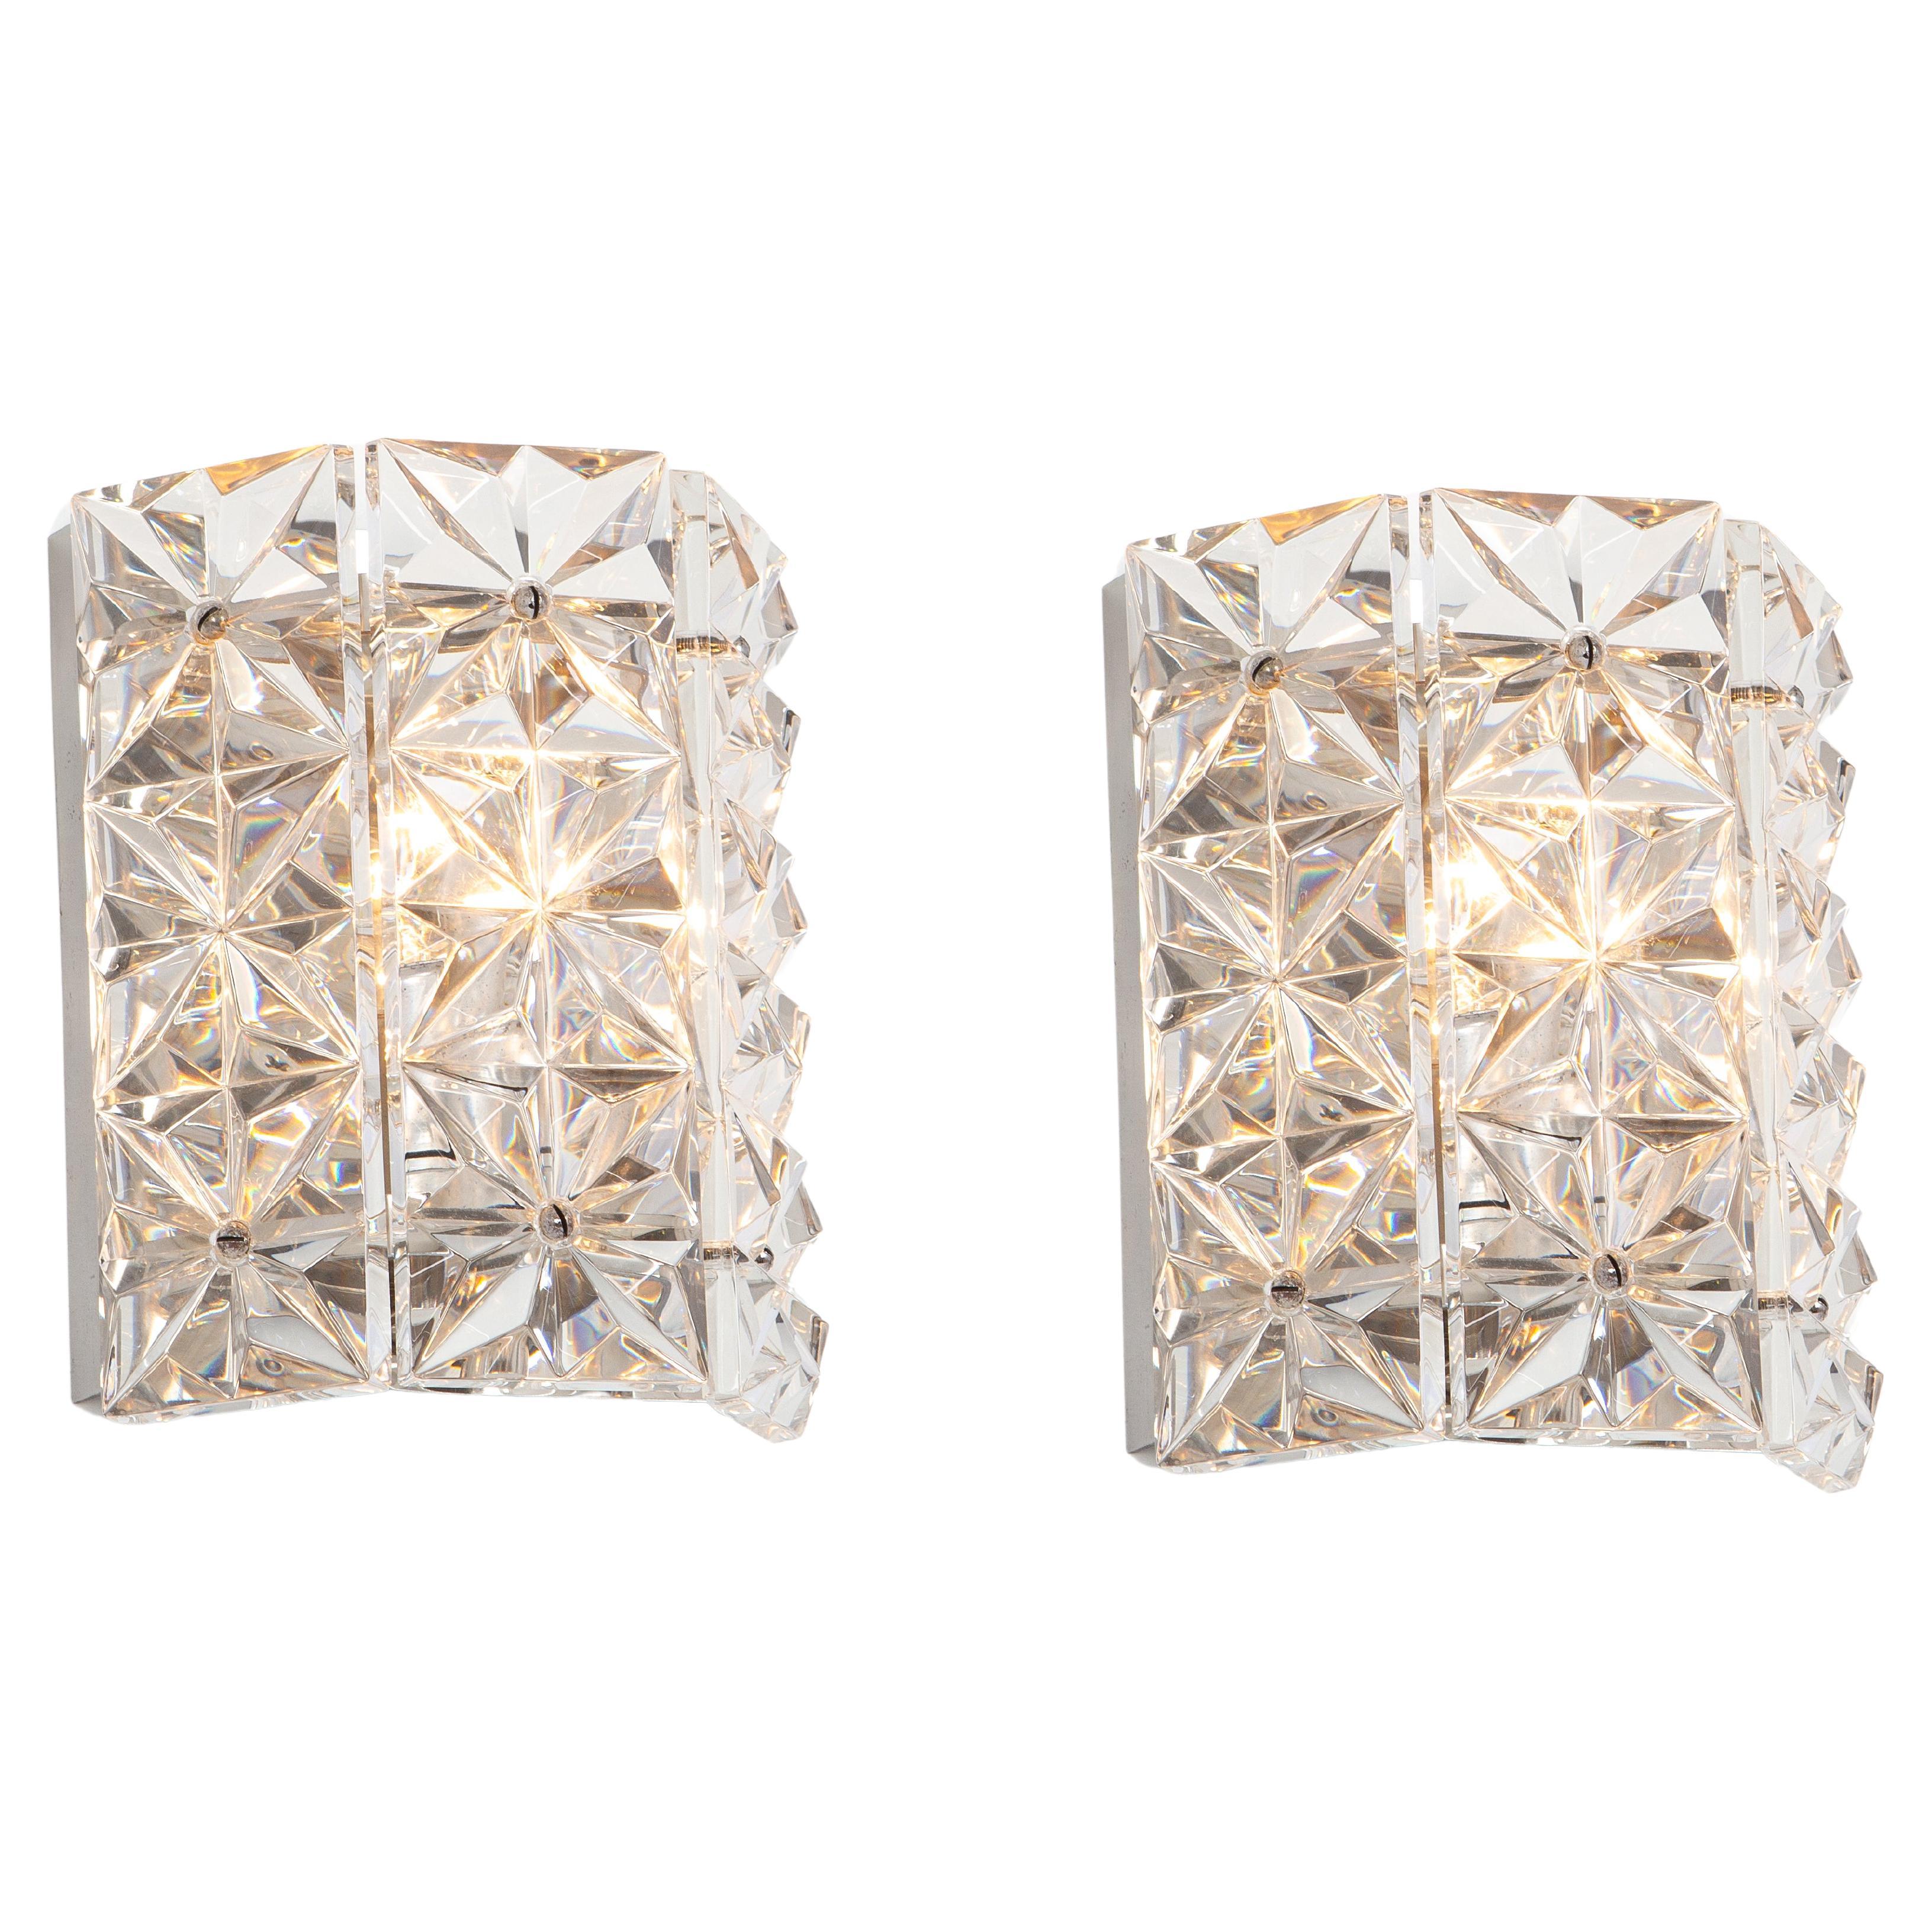 Wonderful Petite Pair of Crystal Sconces , Germany, 1970s For Sale